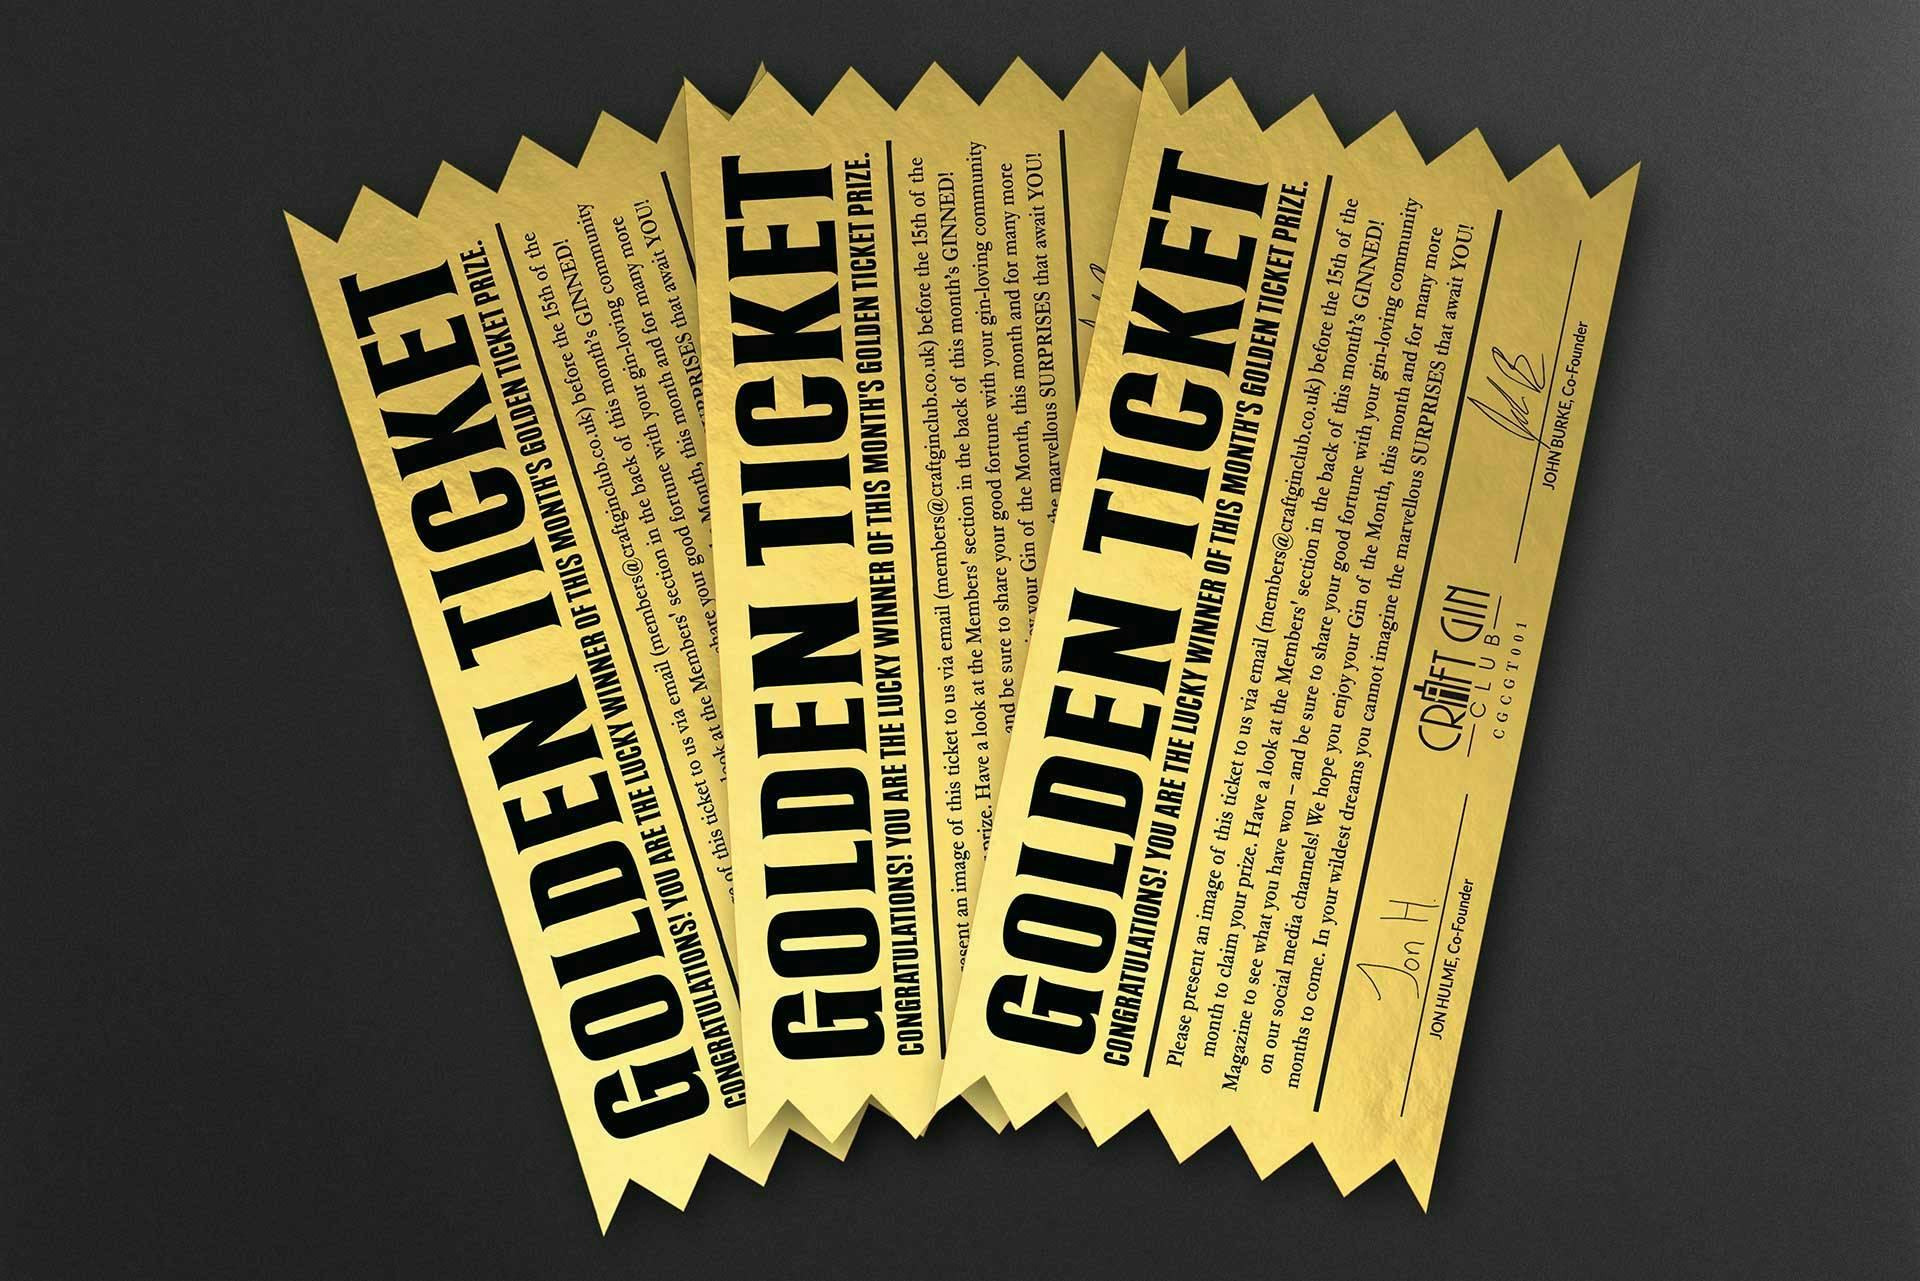 Will you be our February Golden Ticket winner?